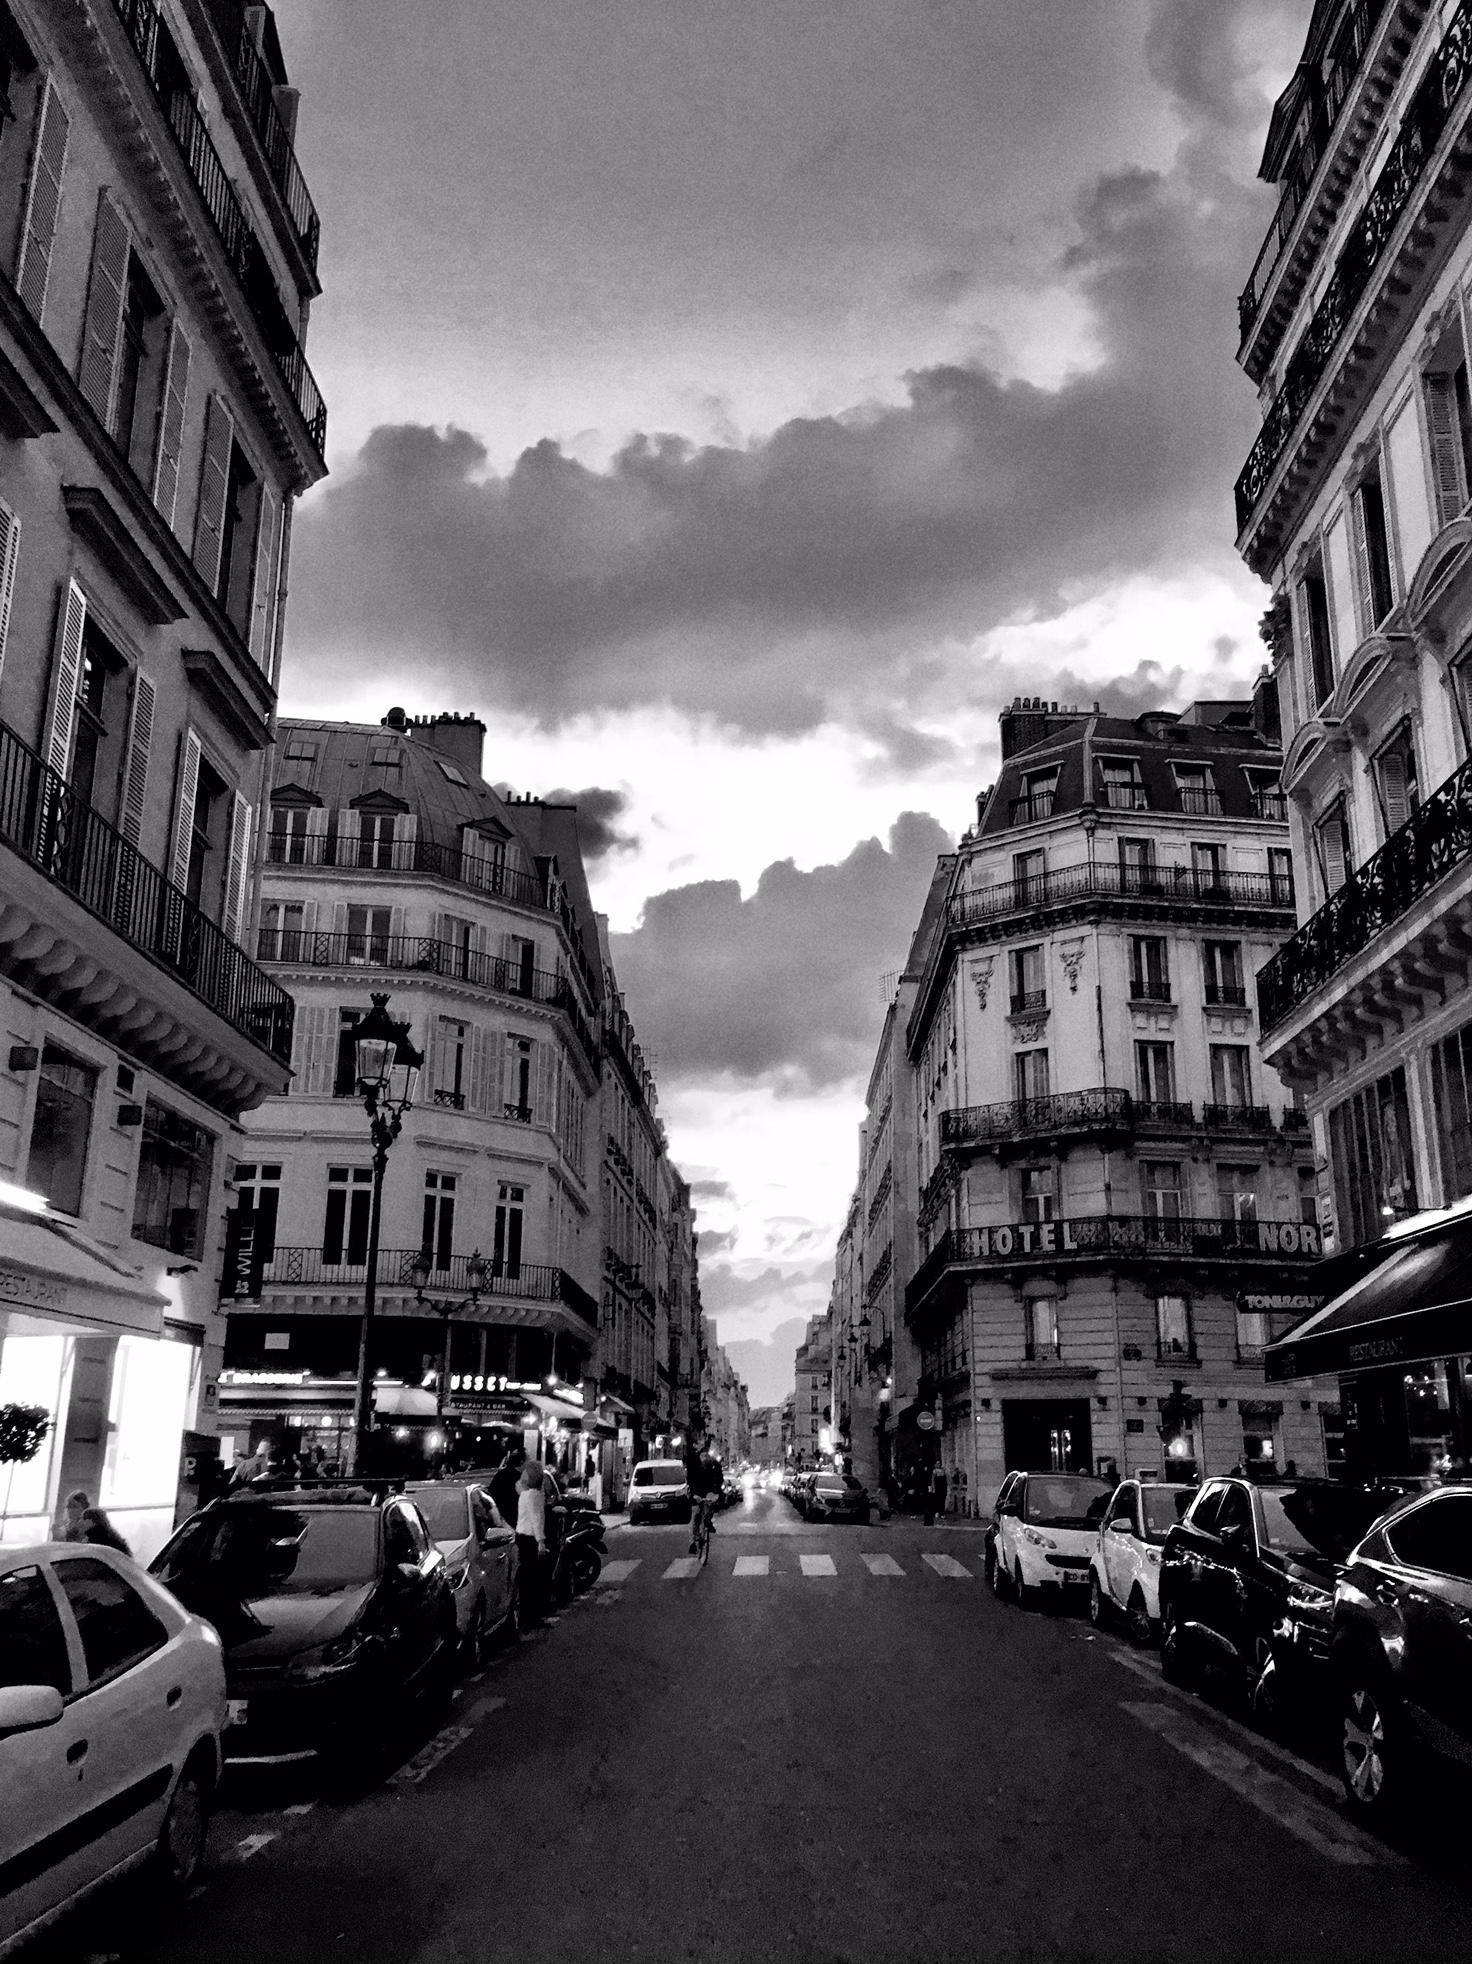 Paris
#inthesky 
22”x17” photographic prints on archival paper
Each limited to an edition of 7
$900 (unframed) / $1175 (framed)
#inthesky
A mobile photography essay that began in 2015. This ongoing international series, intending to capture tension